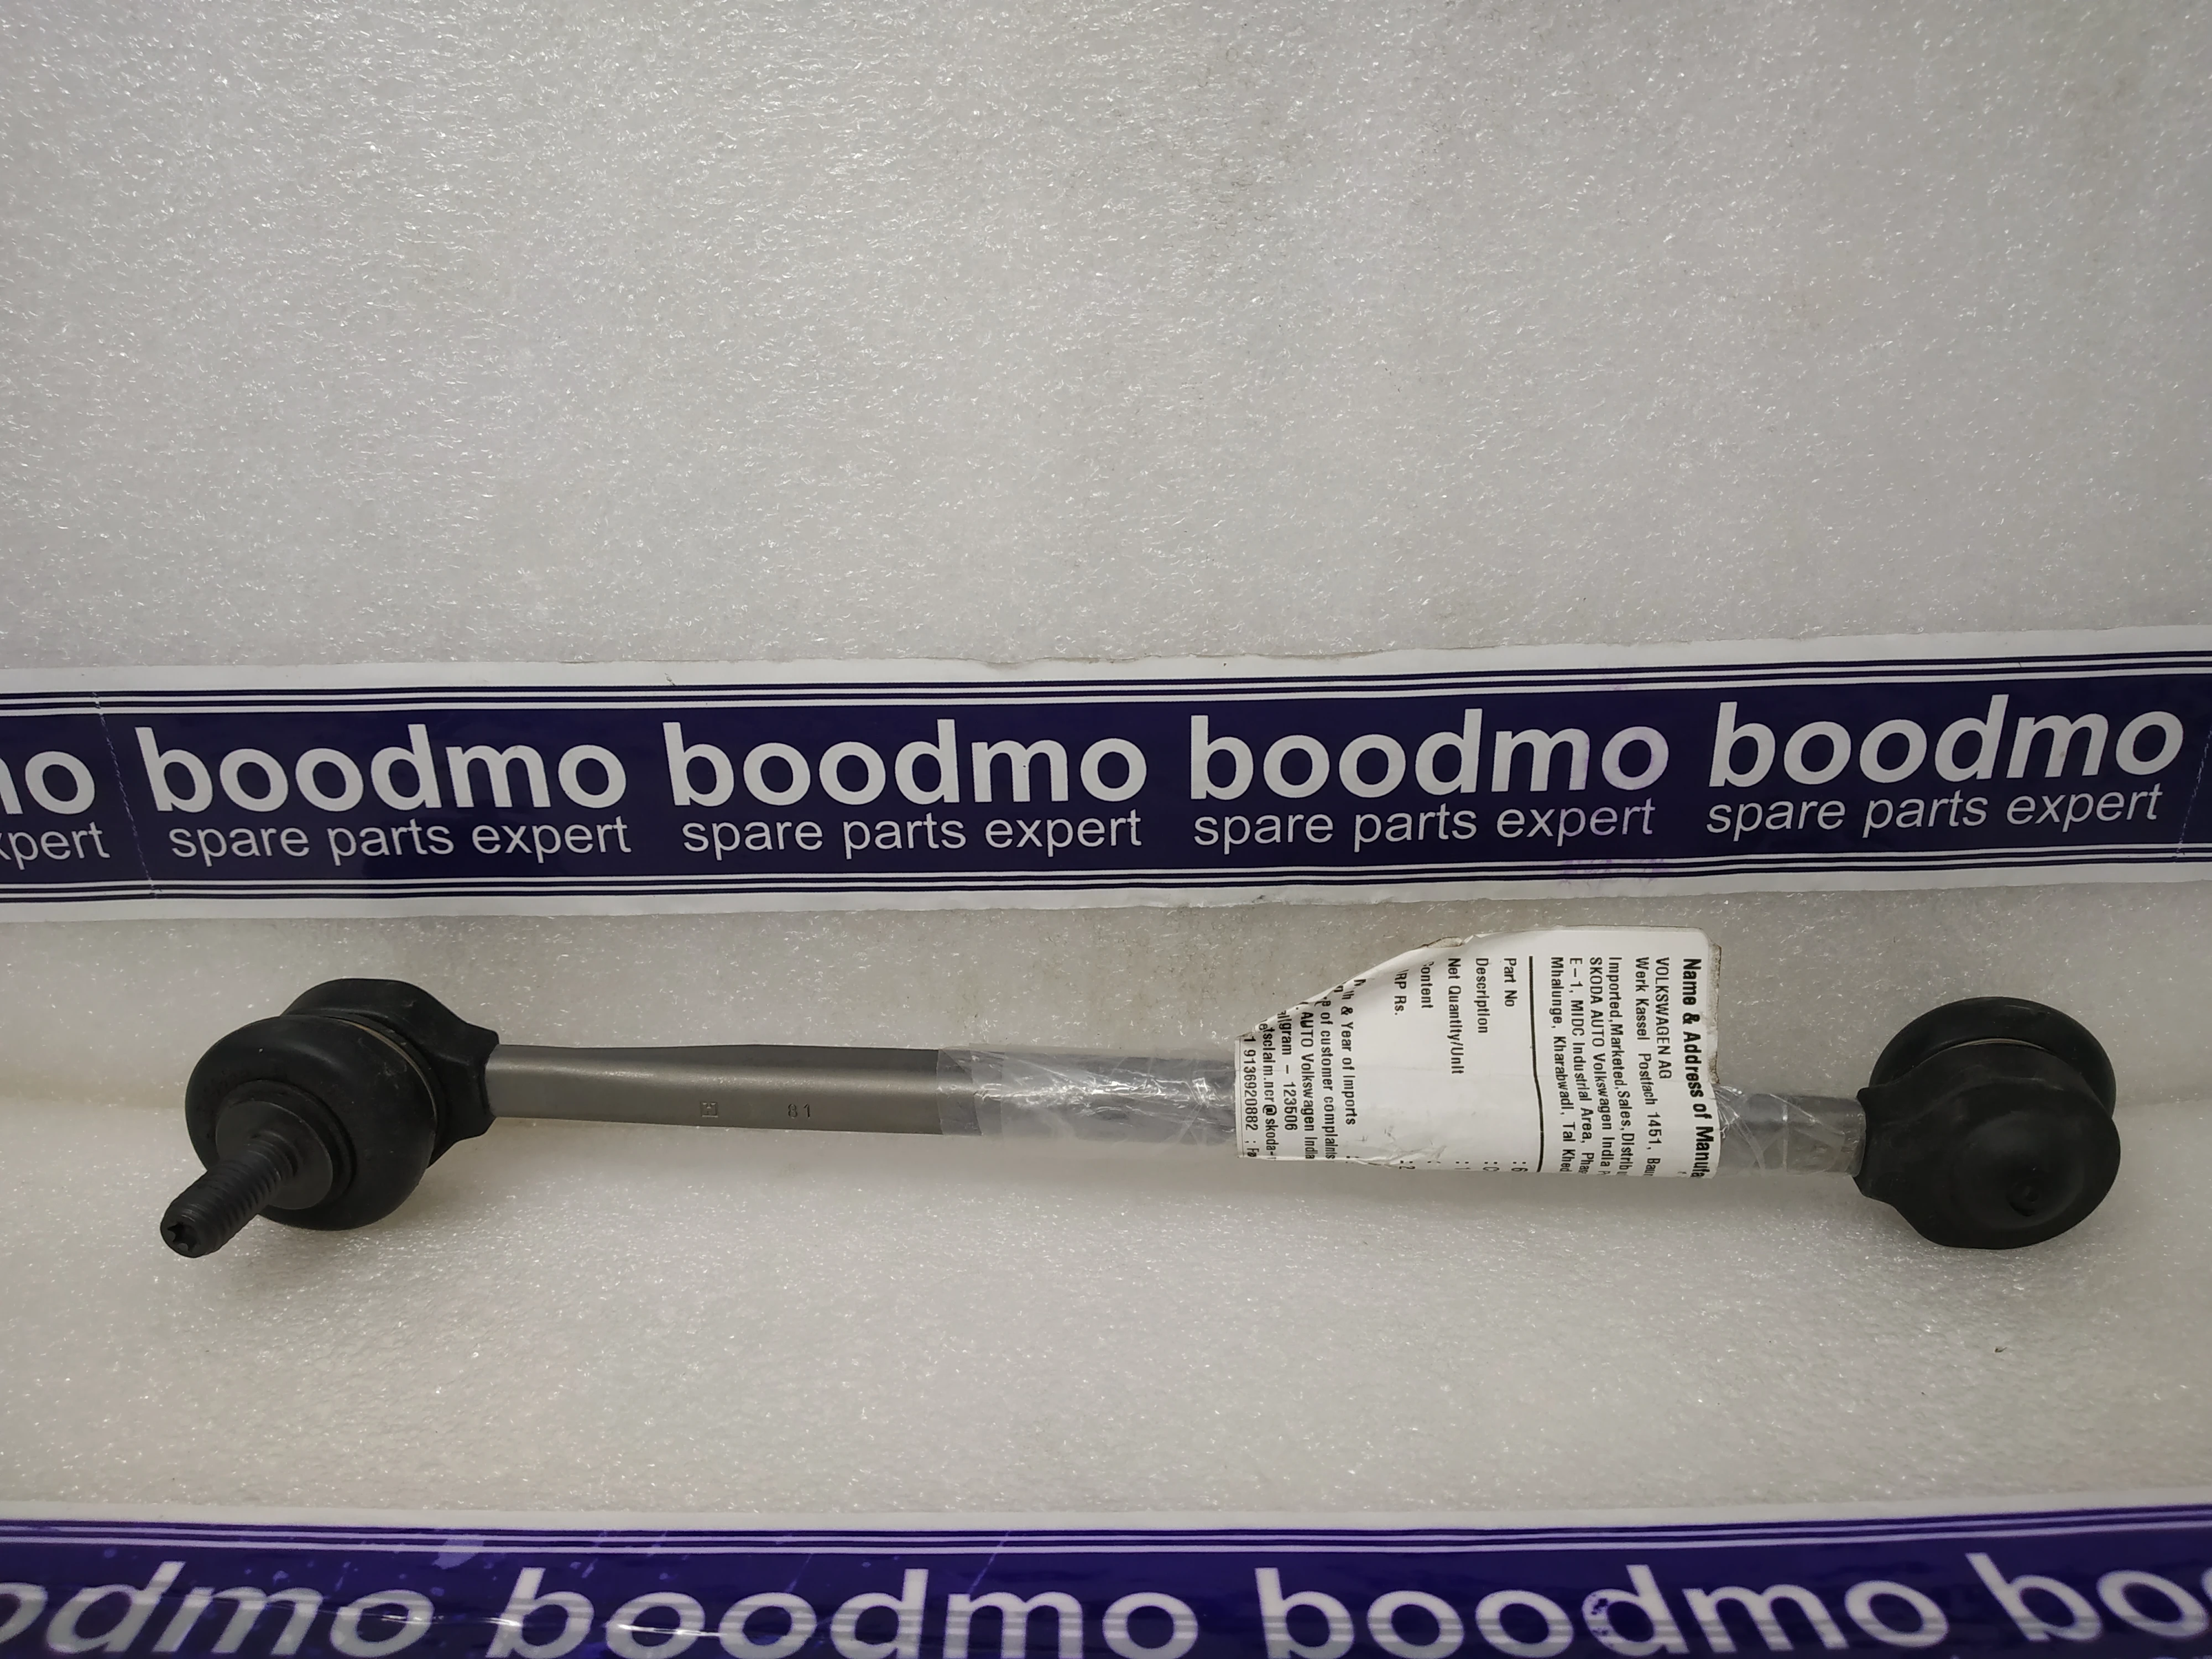 COUPLING ROD: VAG (VW, AUDI, SKODA) 6R0315 -compatibility, features,  prices. boodmo